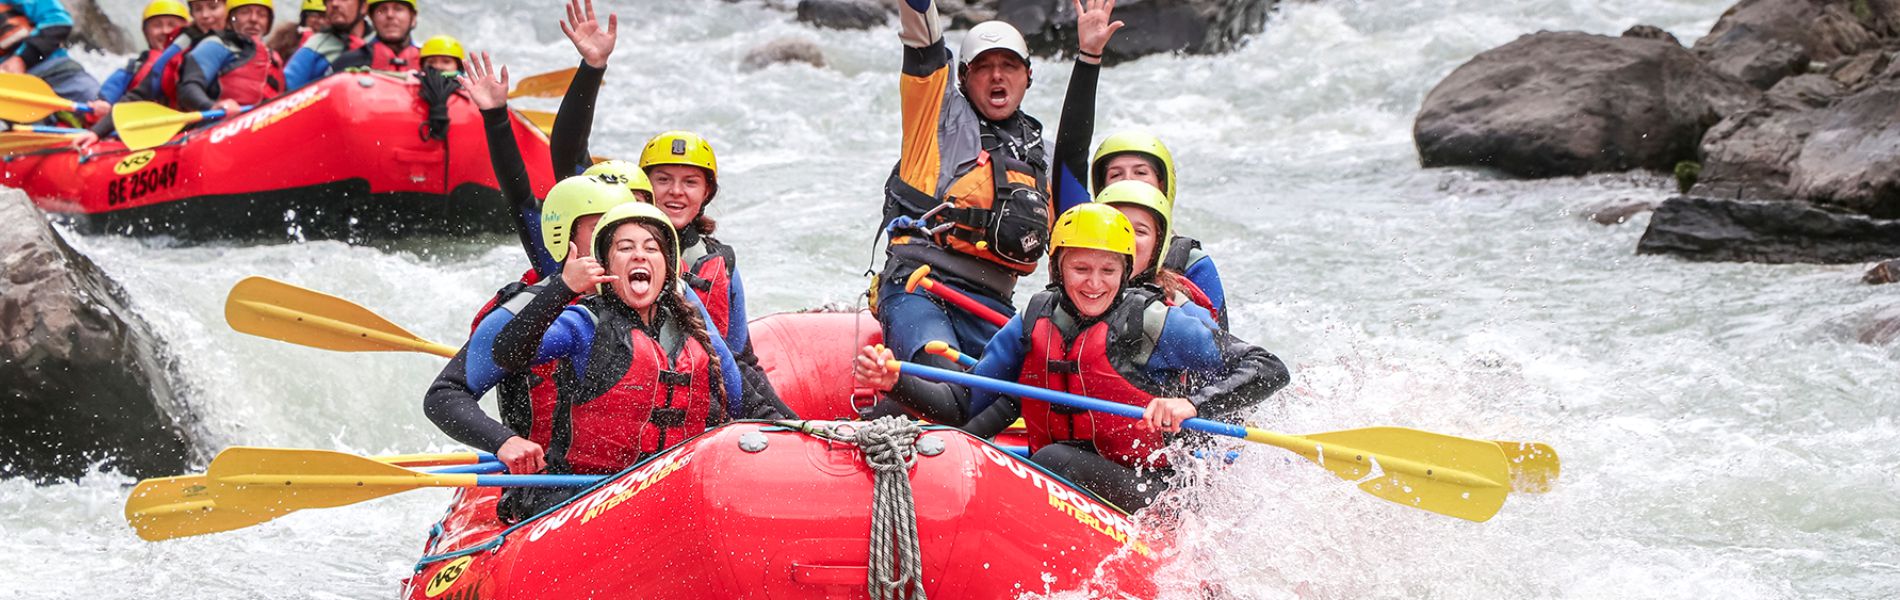 River Rafting Simme